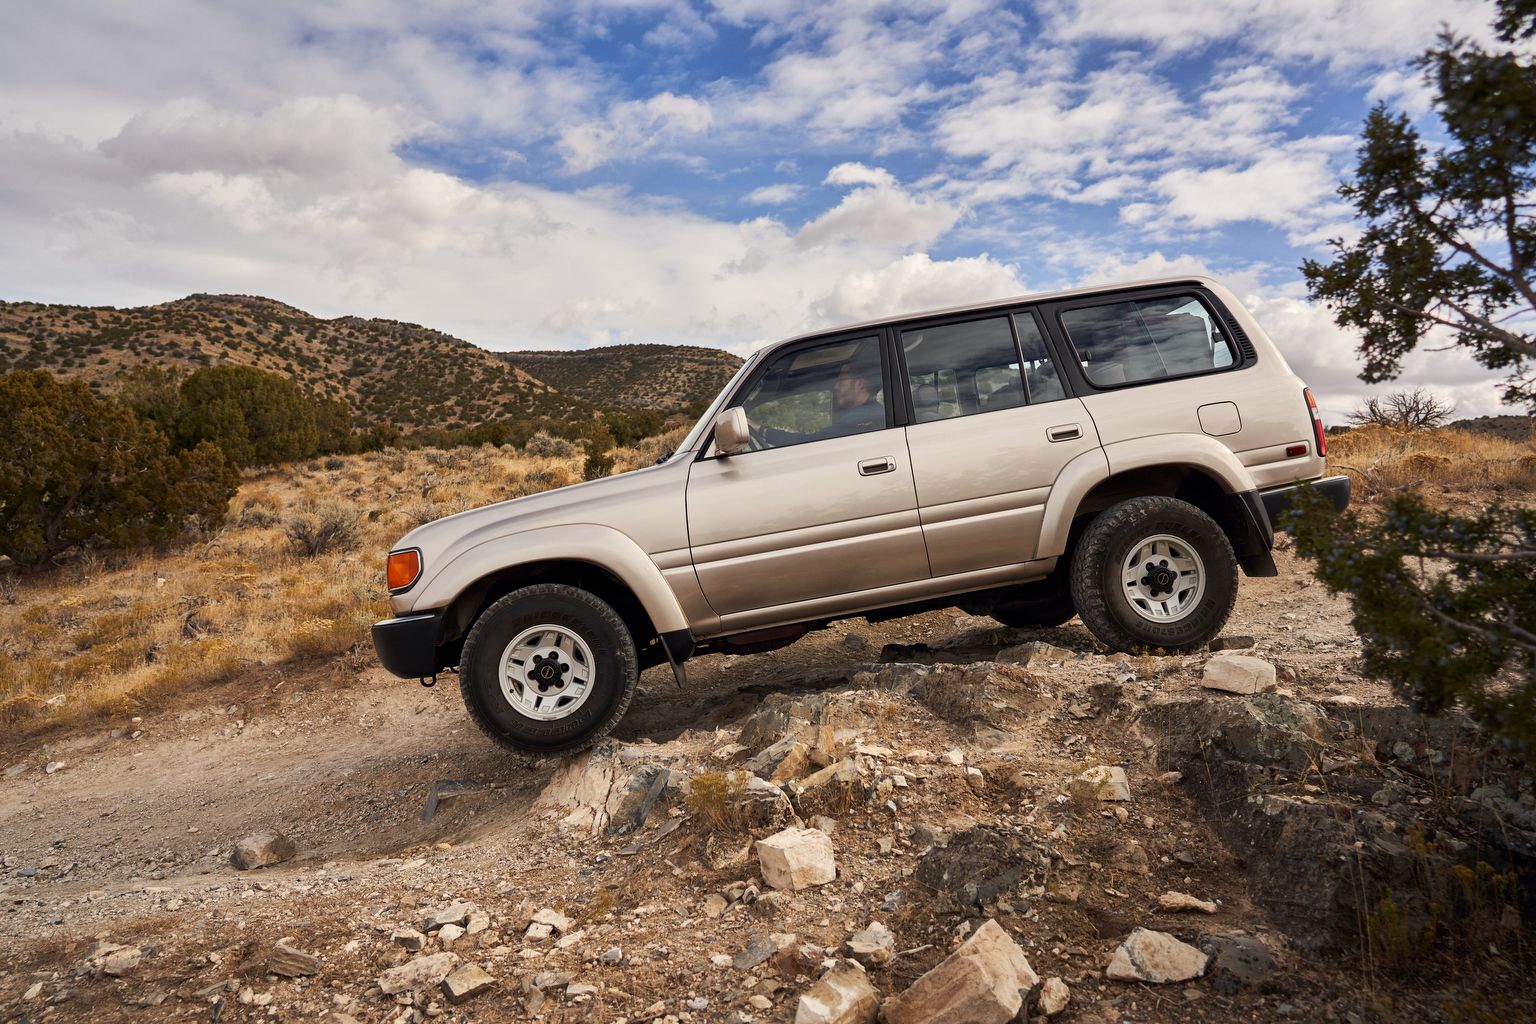 New Toyota Land Cruiser: Carwow gets hands on with new off-roader